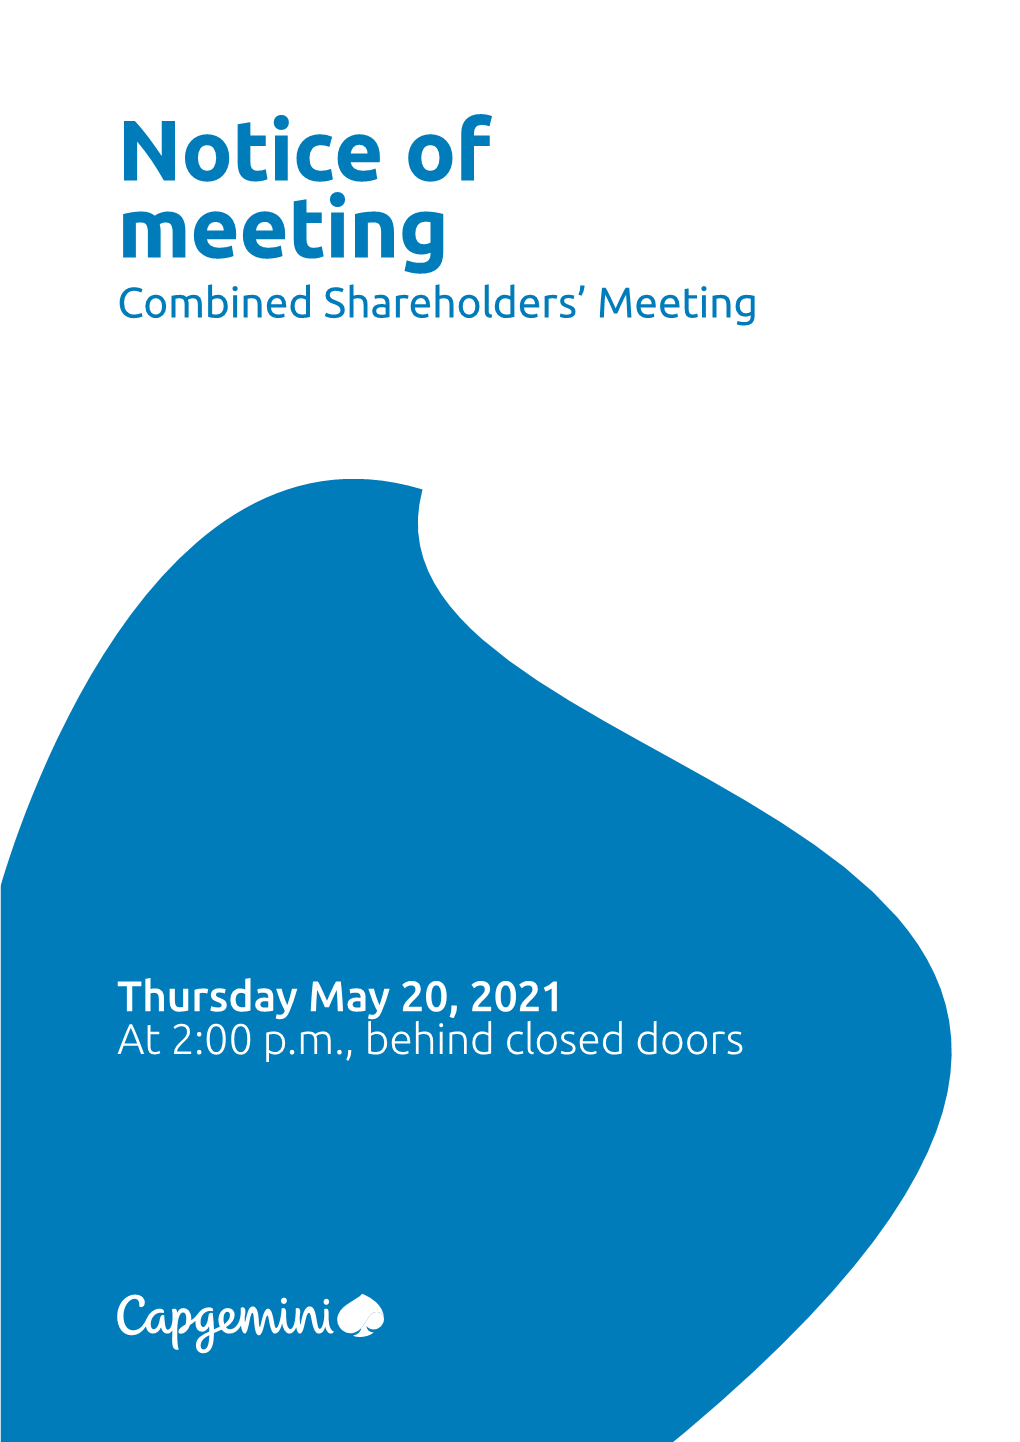 Notice of Meeting Combined Shareholders’ Meeting